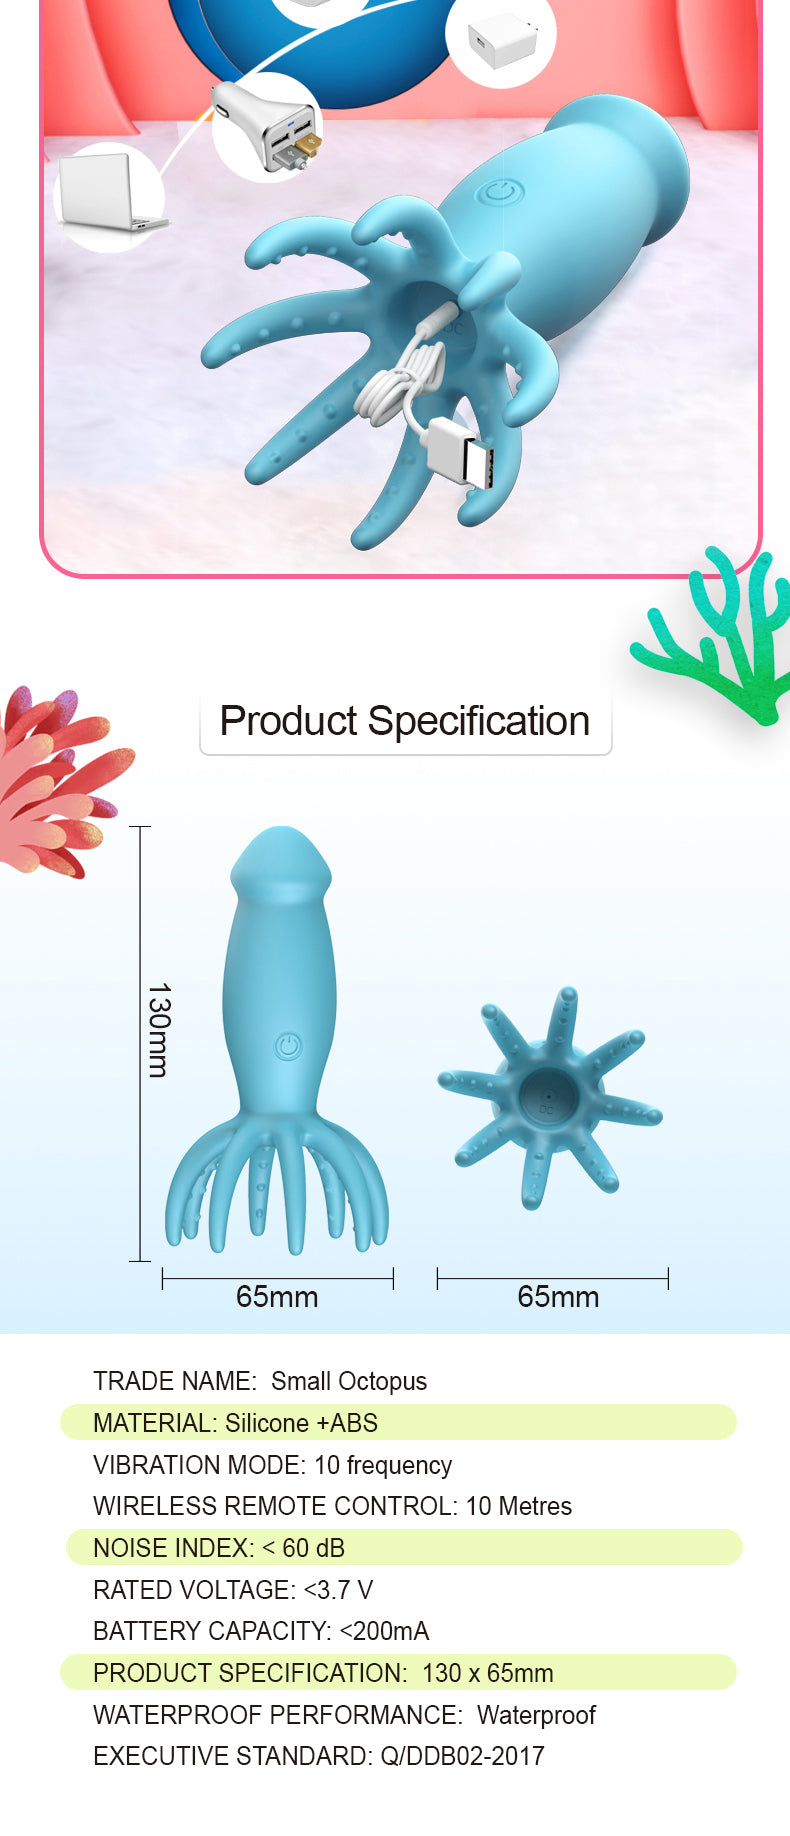 Small Octopus remote jump egg vibrator 10 frequency vibration for women (3)